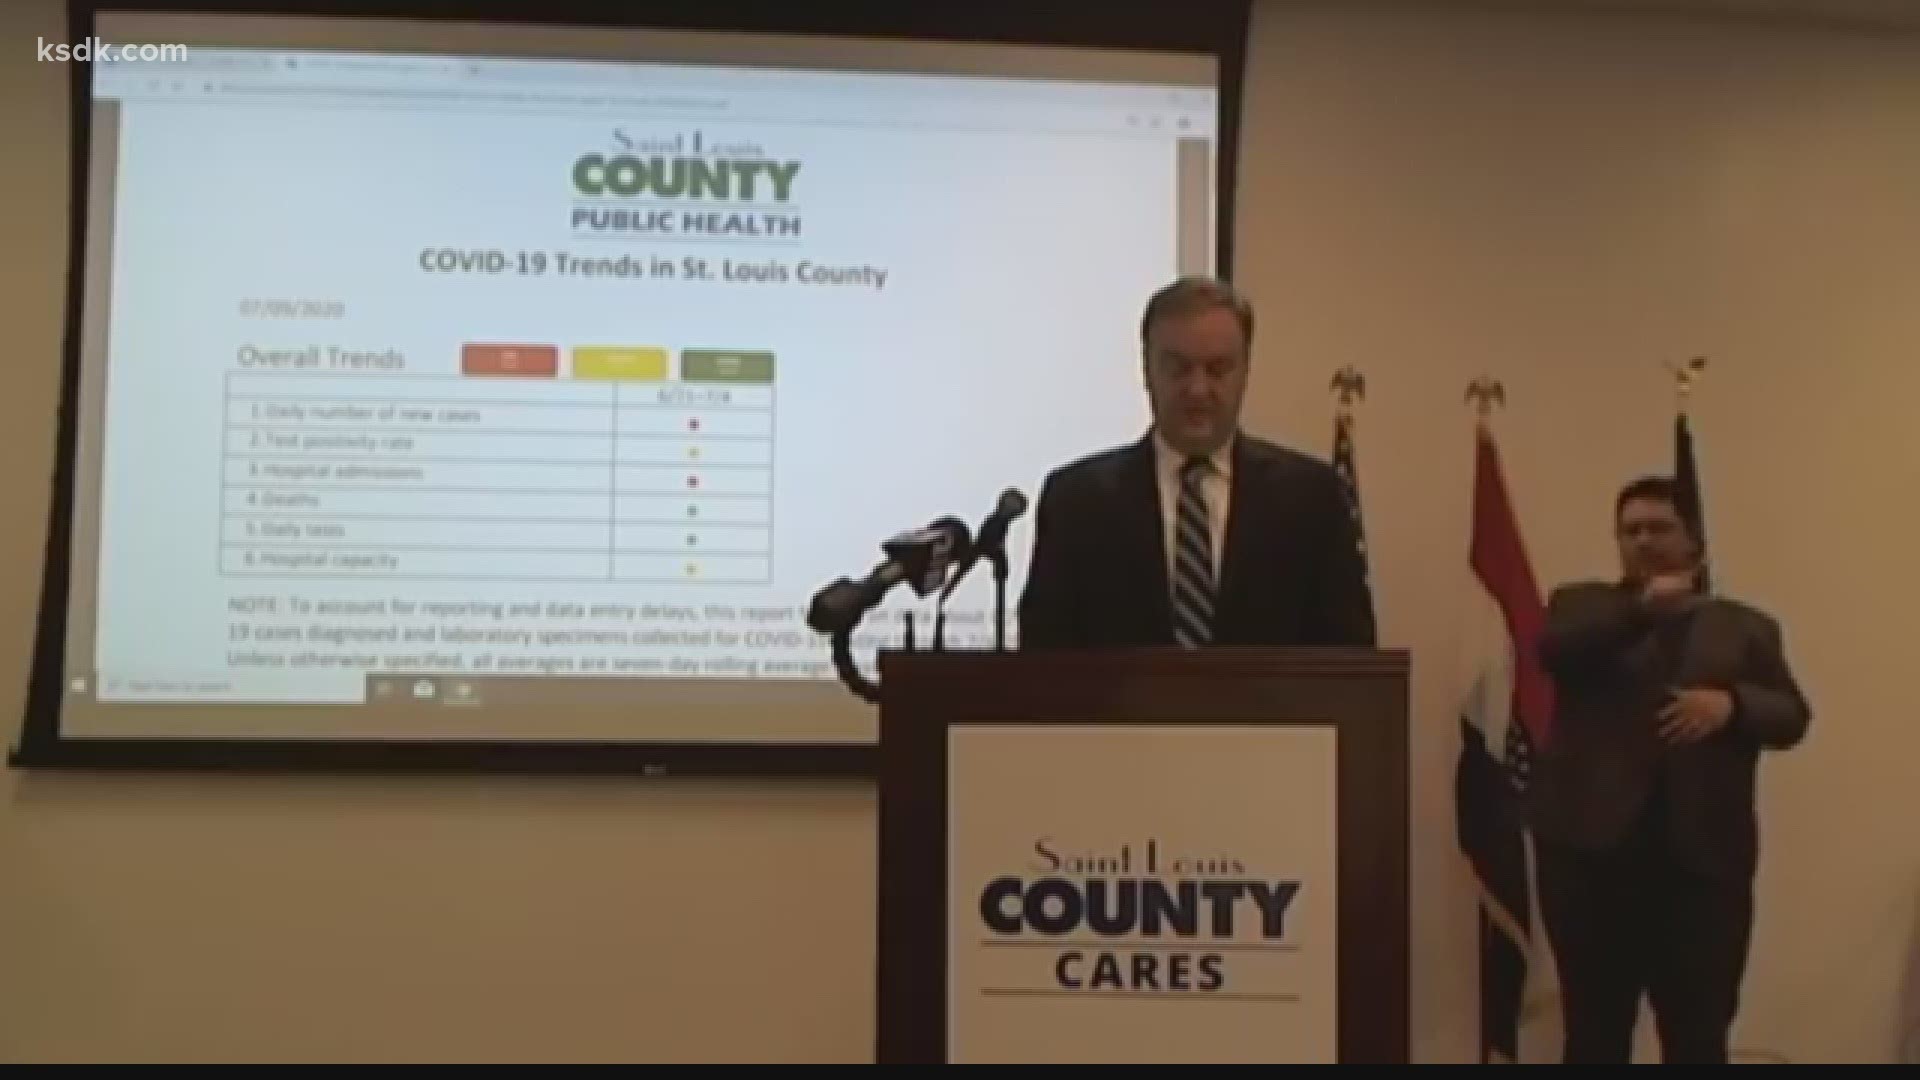 County Executive Sam Page said the number of COVID-19 positive cases in people ages 20-29 has increased by 195%